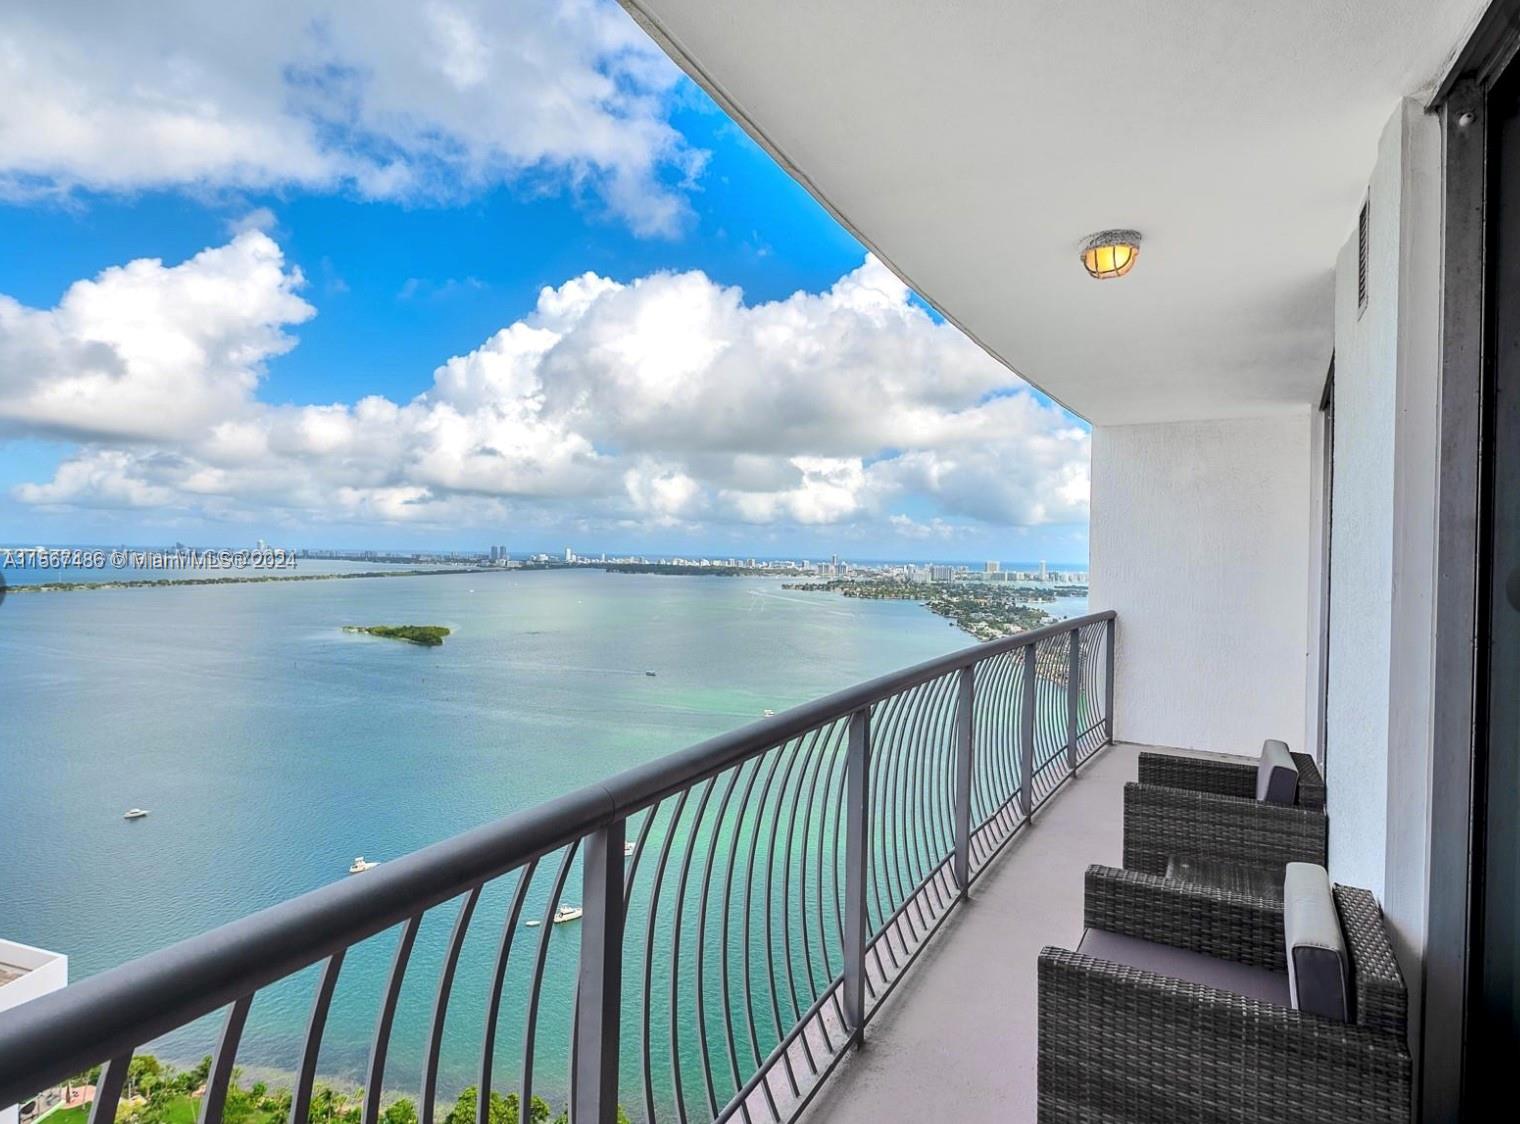 This great apartment is located within minutes of shops, grocery stores, and restaurants. Situated on the 45th floor, this fully furnished apartment boasts breathtaking direct bay views of the Venetian Causeway and Miami Beach. The unit includes cable TV and Wi-Fi for entertainment; while the kitchen features stainless steel appliances, a washer and dryer inside the unit add convenience to your daily routine.  Pet-lovers will appreciate that large dogs are welcome, and a designated parking spot is included. With high-tech security features in the building, you can enjoy peace of mind in this elegant and secure environment.  While the pool may be temporarily closed, residents have access to a wealth of nearby amenities and attractions. Contact the agent today to inquire about monthly rates.